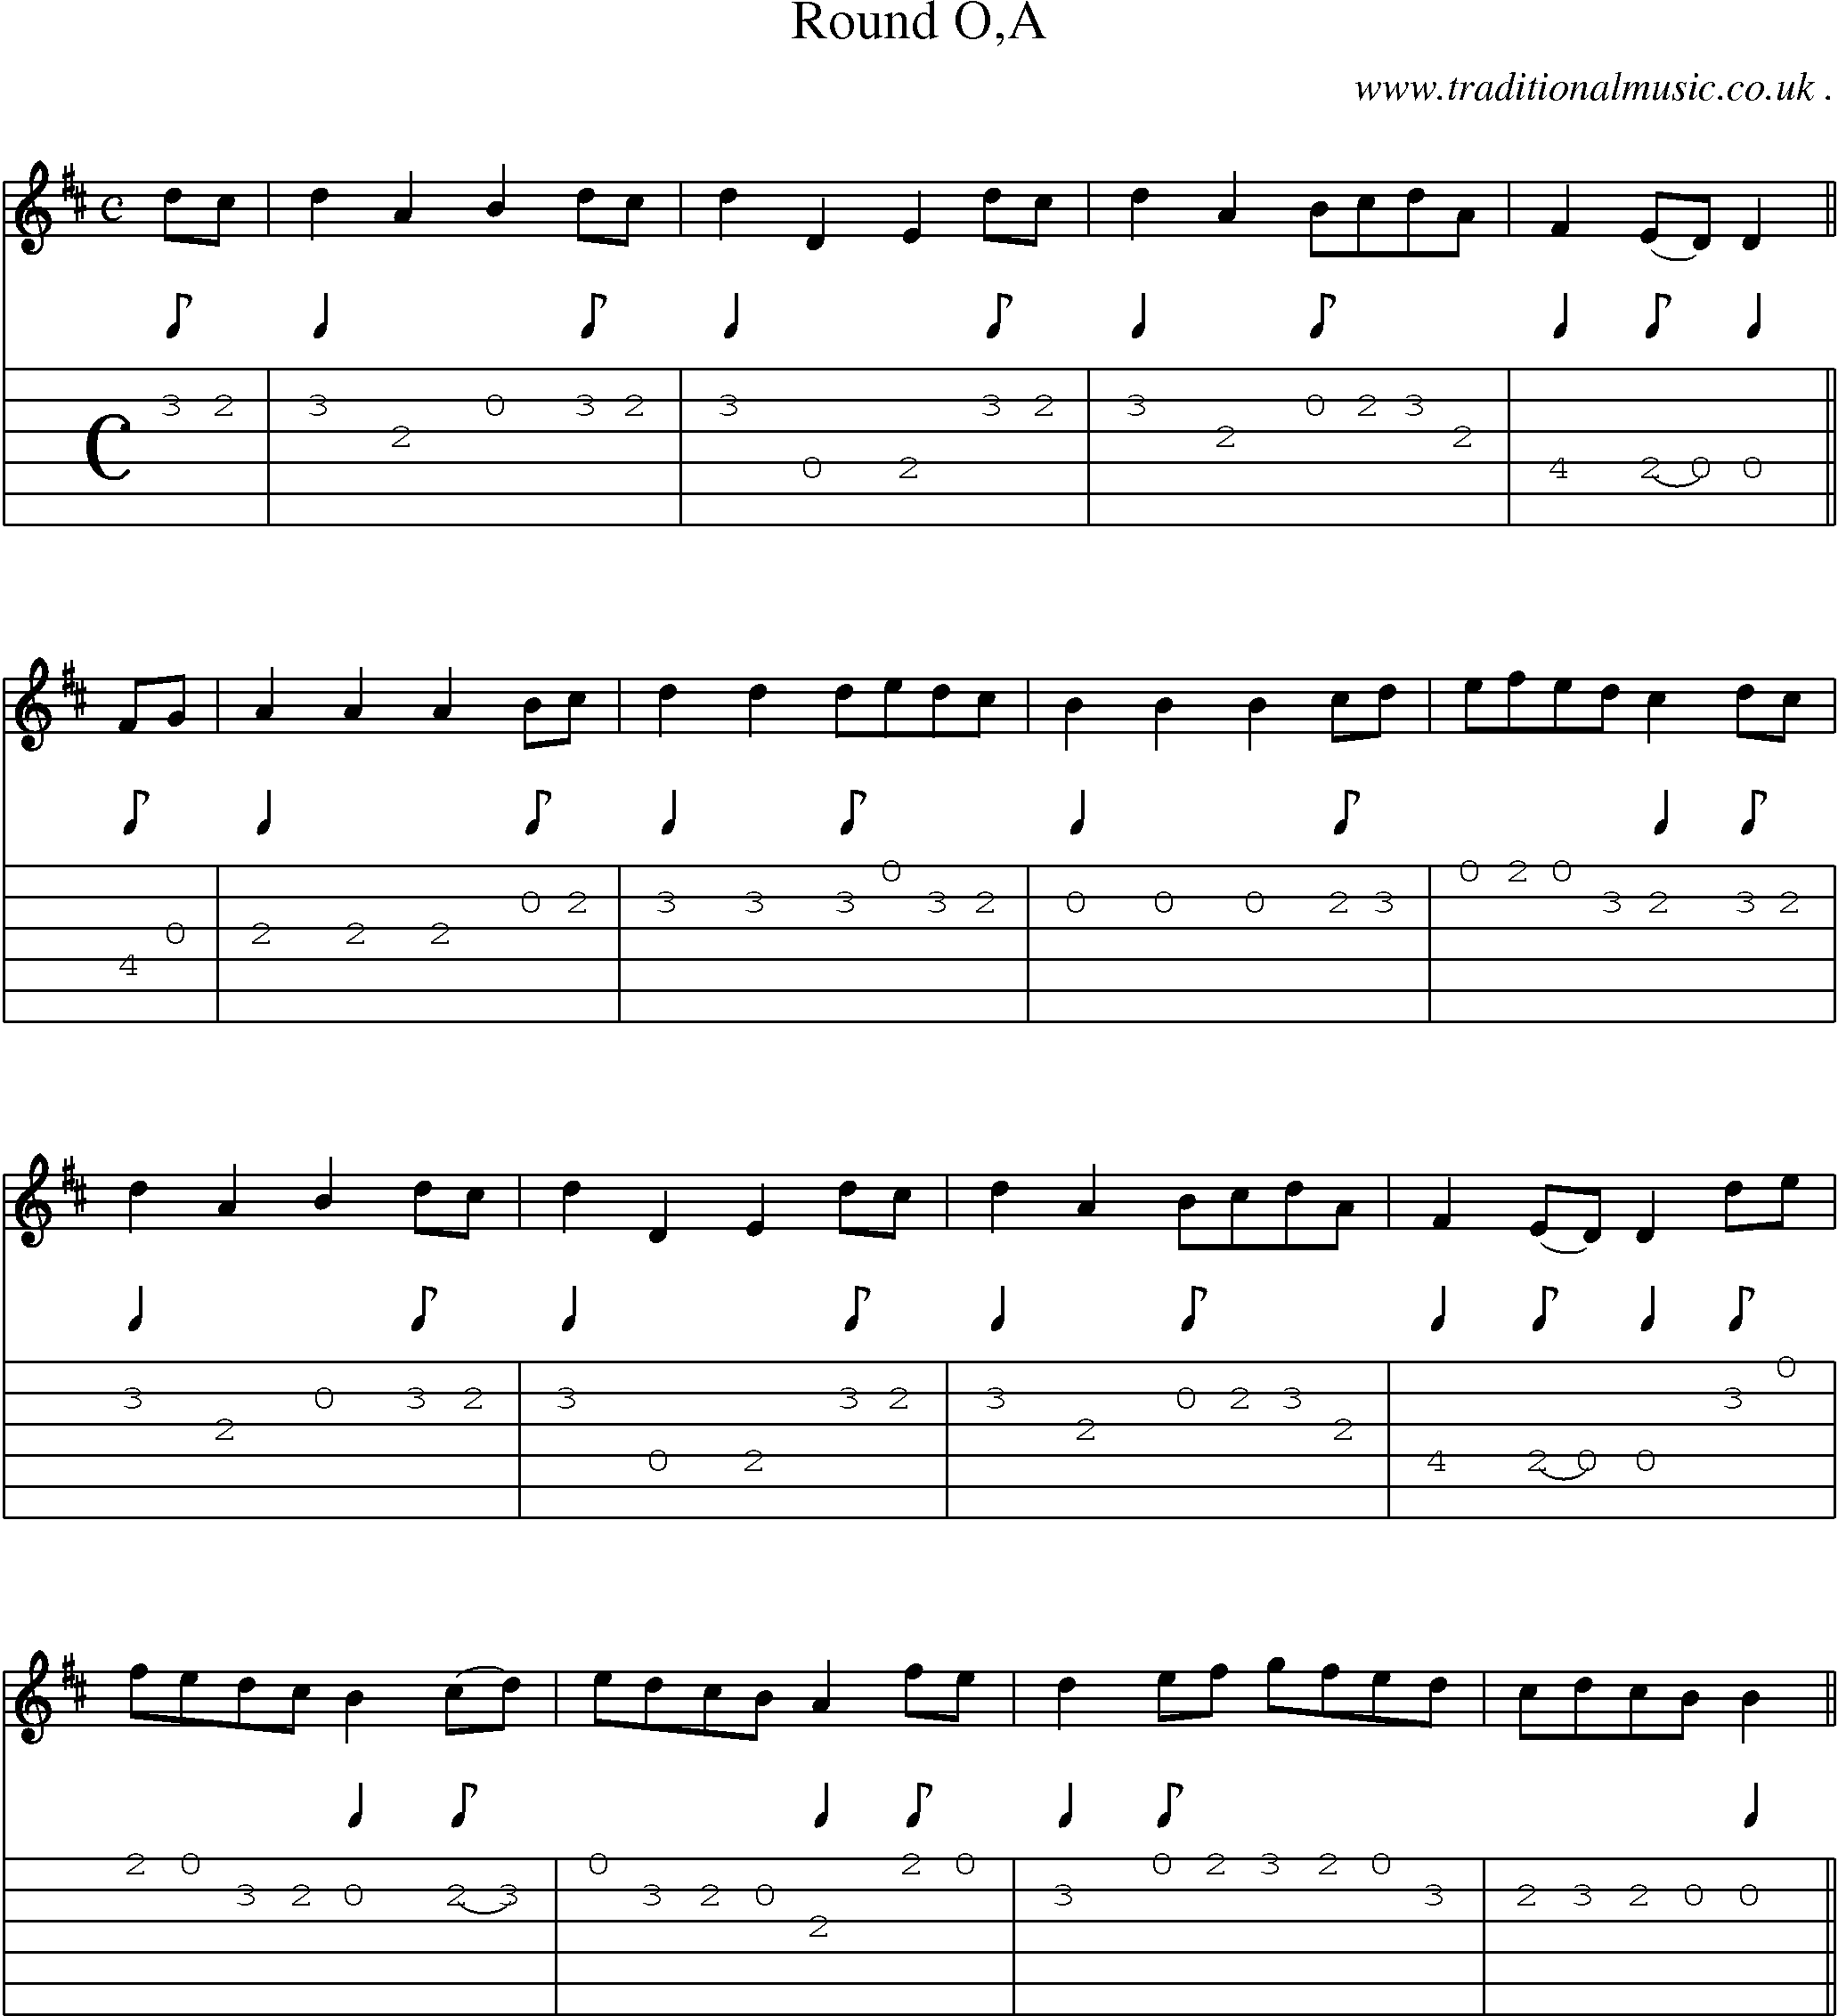 Sheet-Music and Guitar Tabs for Round Oa